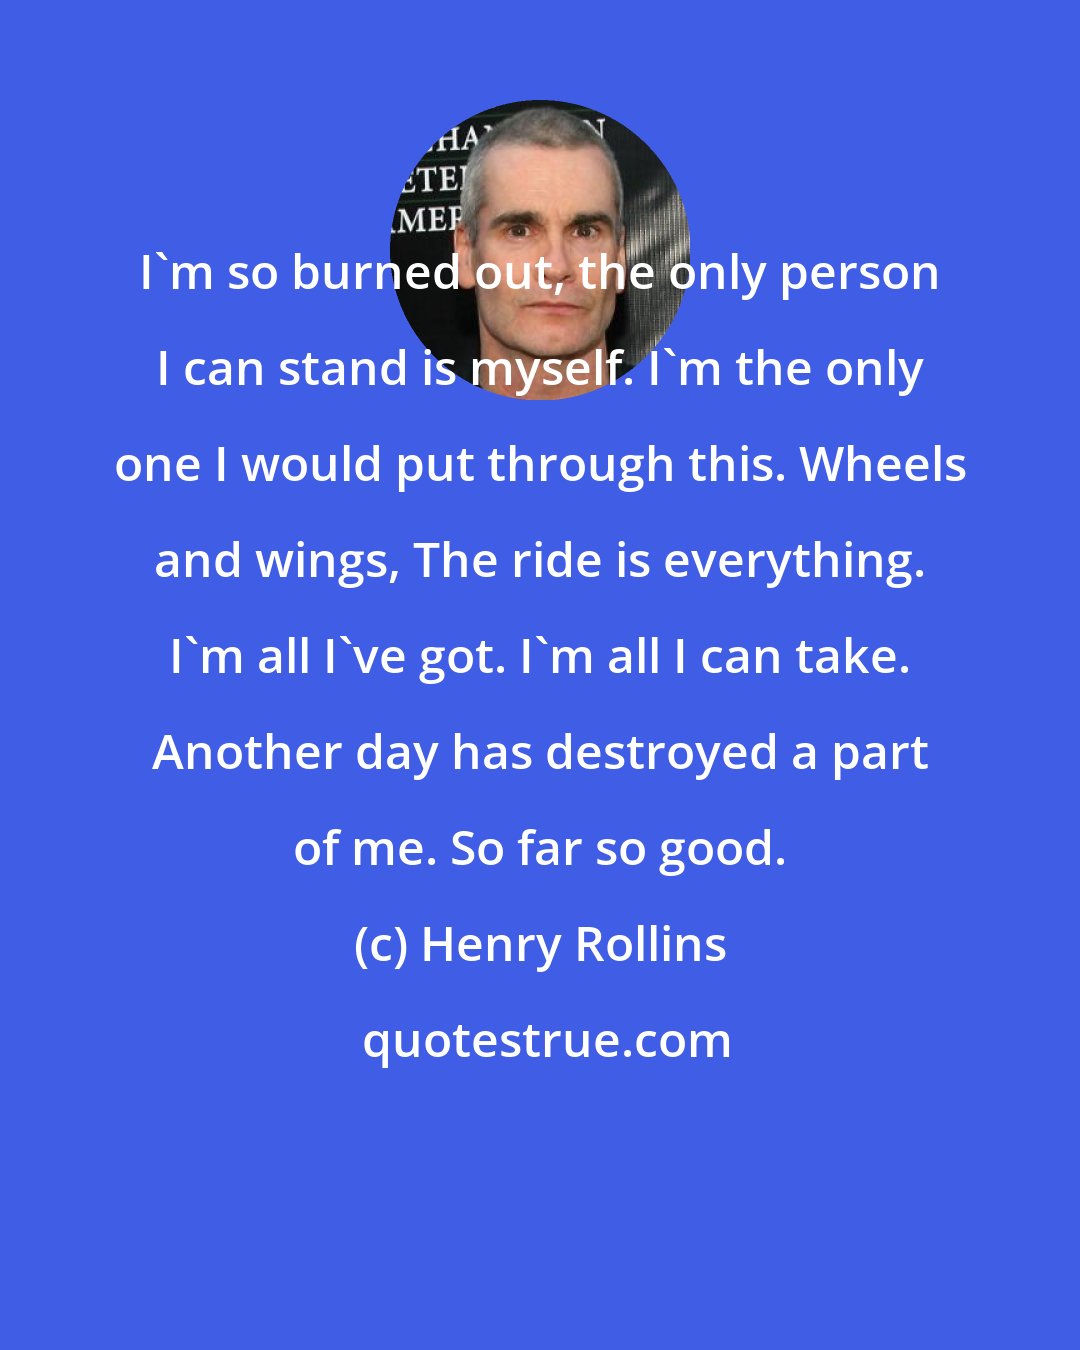 Henry Rollins: I'm so burned out, the only person I can stand is myself. I'm the only one I would put through this. Wheels and wings, The ride is everything. I'm all I've got. I'm all I can take. Another day has destroyed a part of me. So far so good.